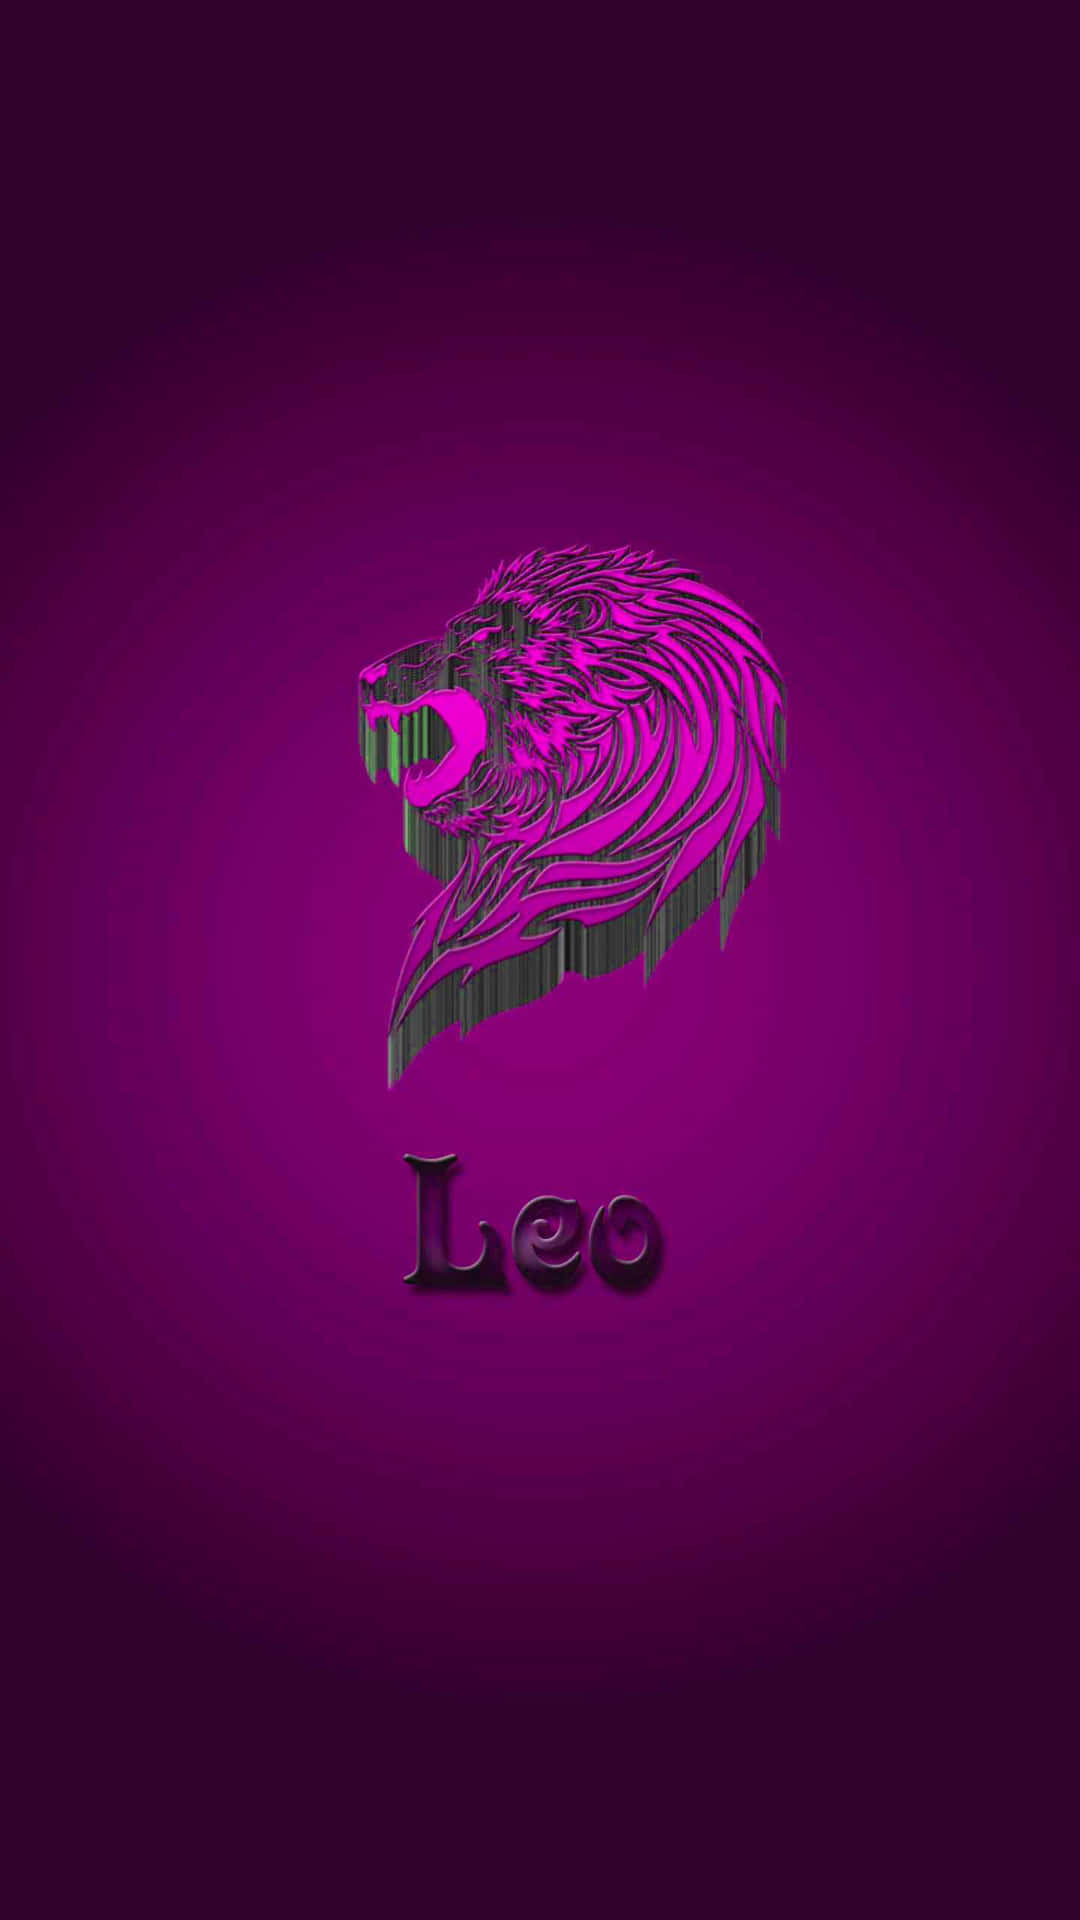 Captivating Leo Constellation in the Night Sky